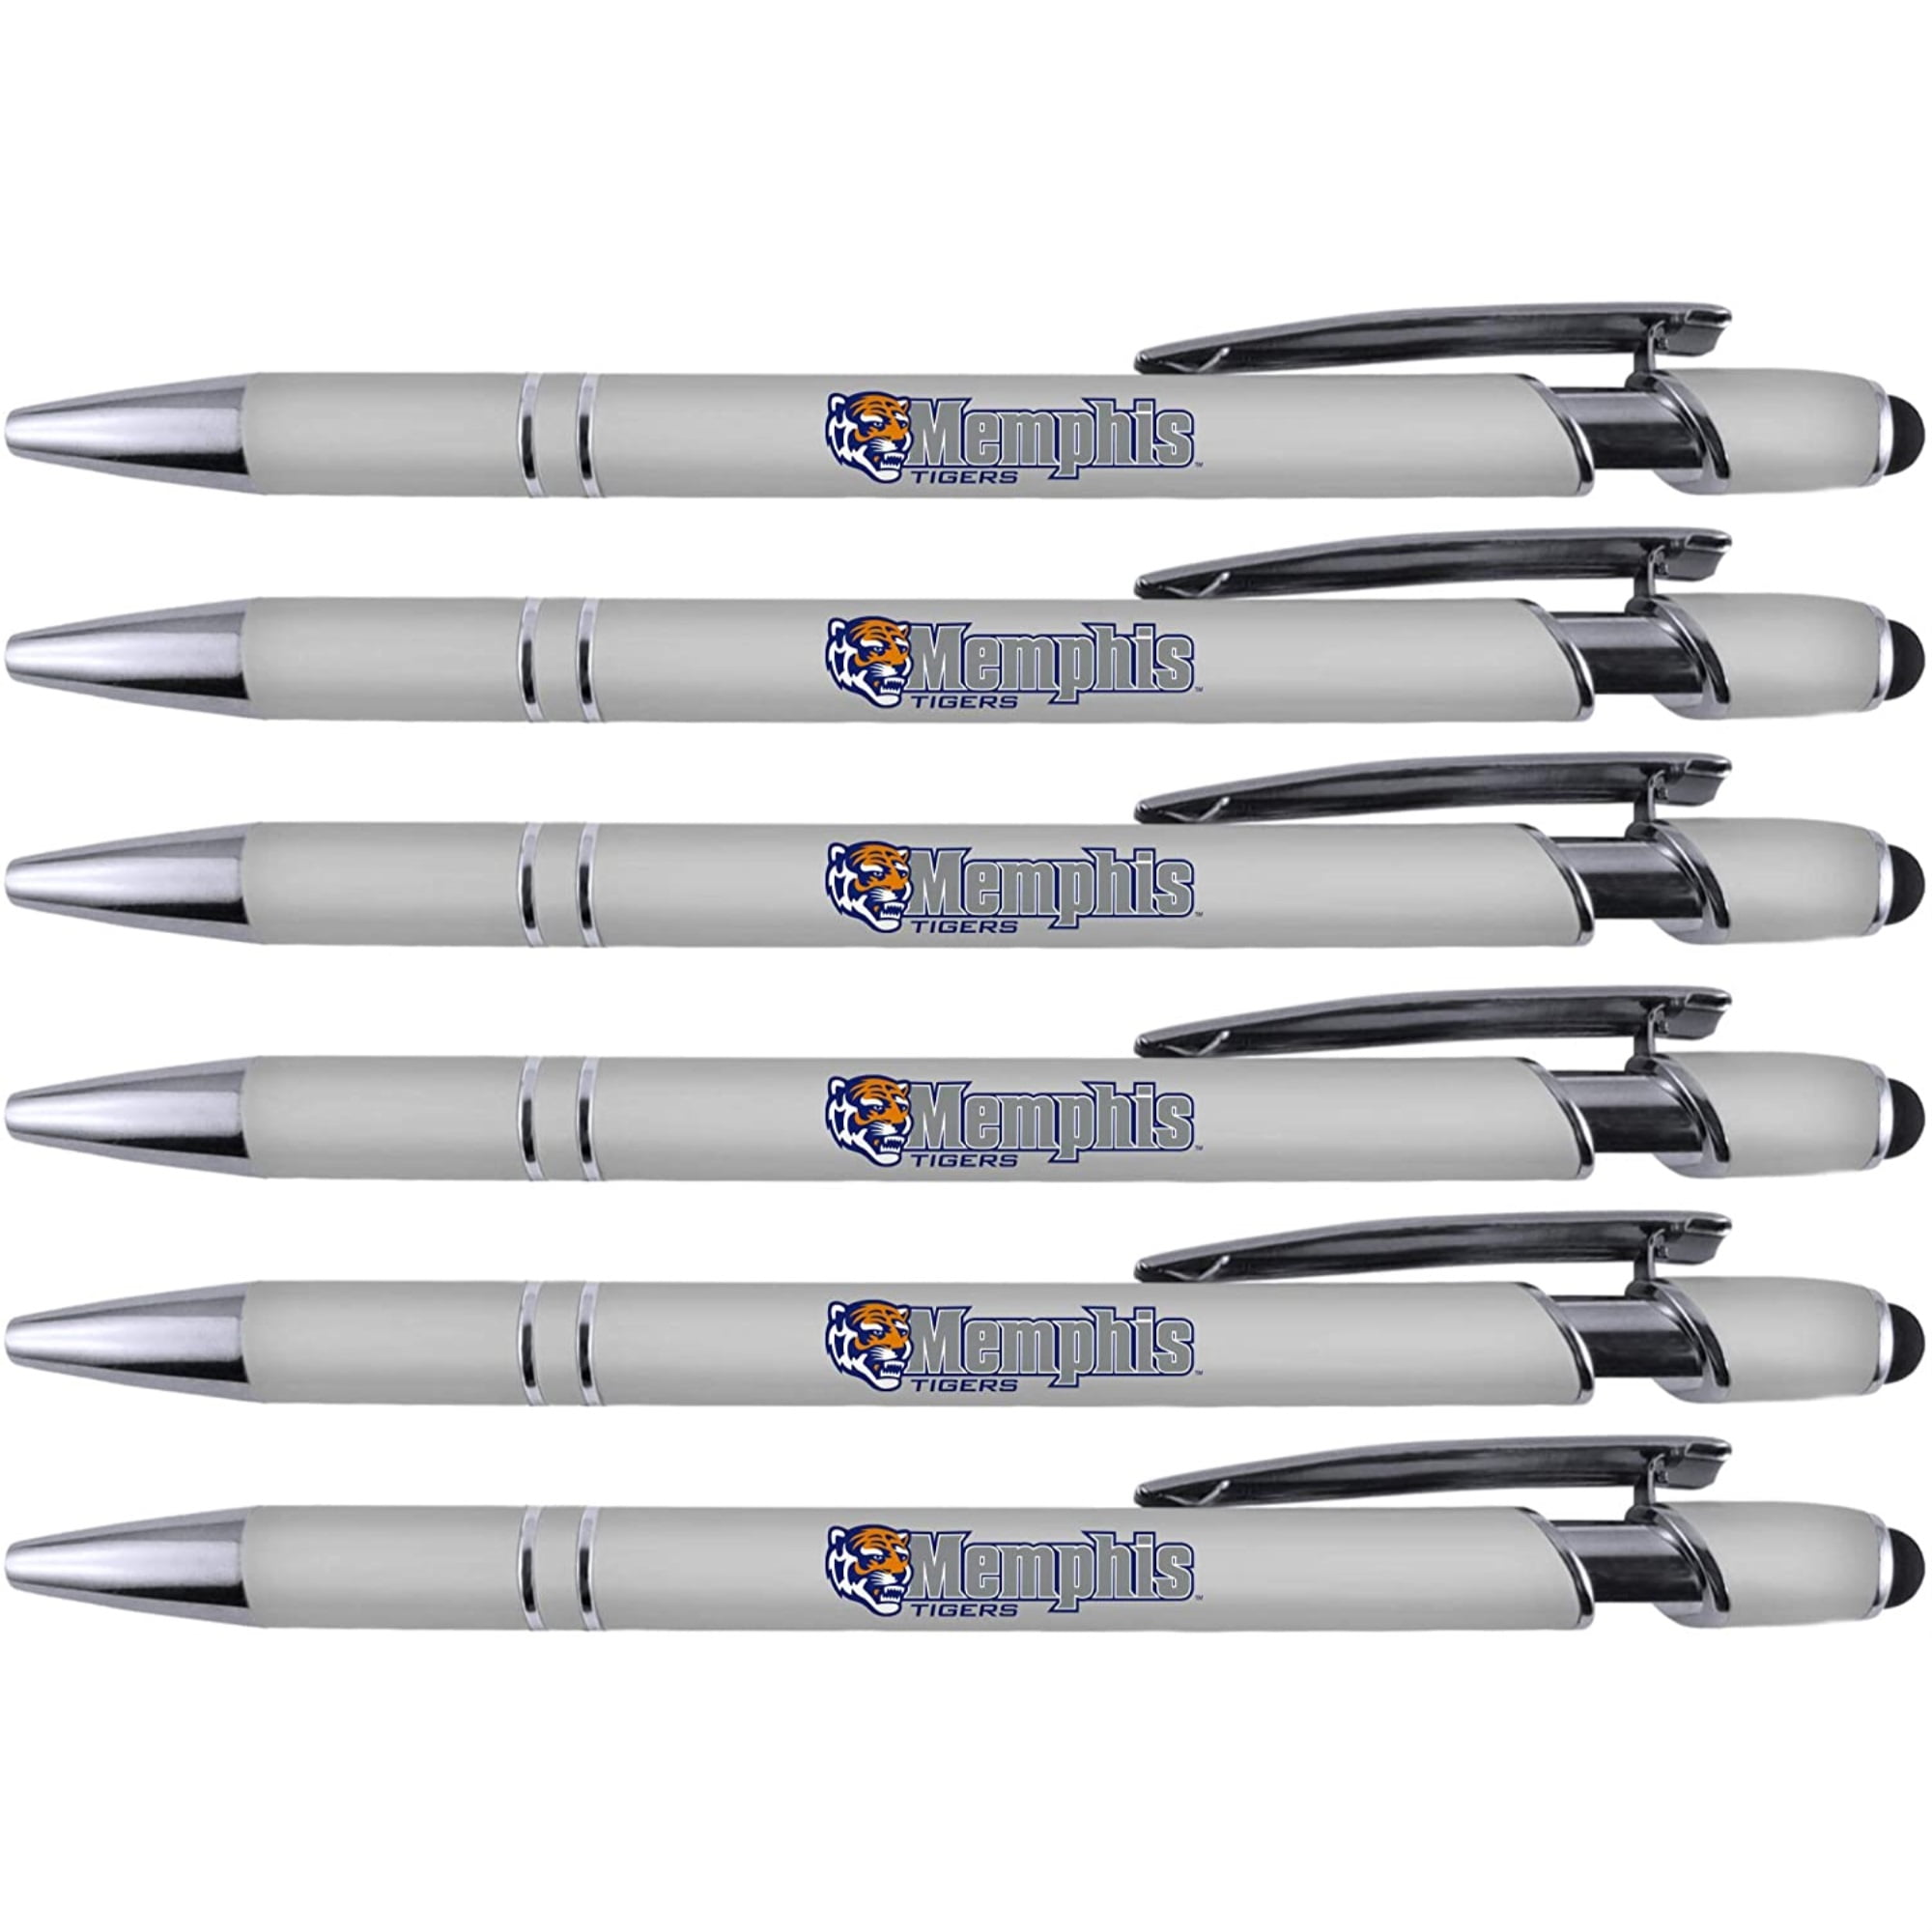 Greeting Pen University of Memphis Soft Touch Coated Metal 6 Pack 30569 